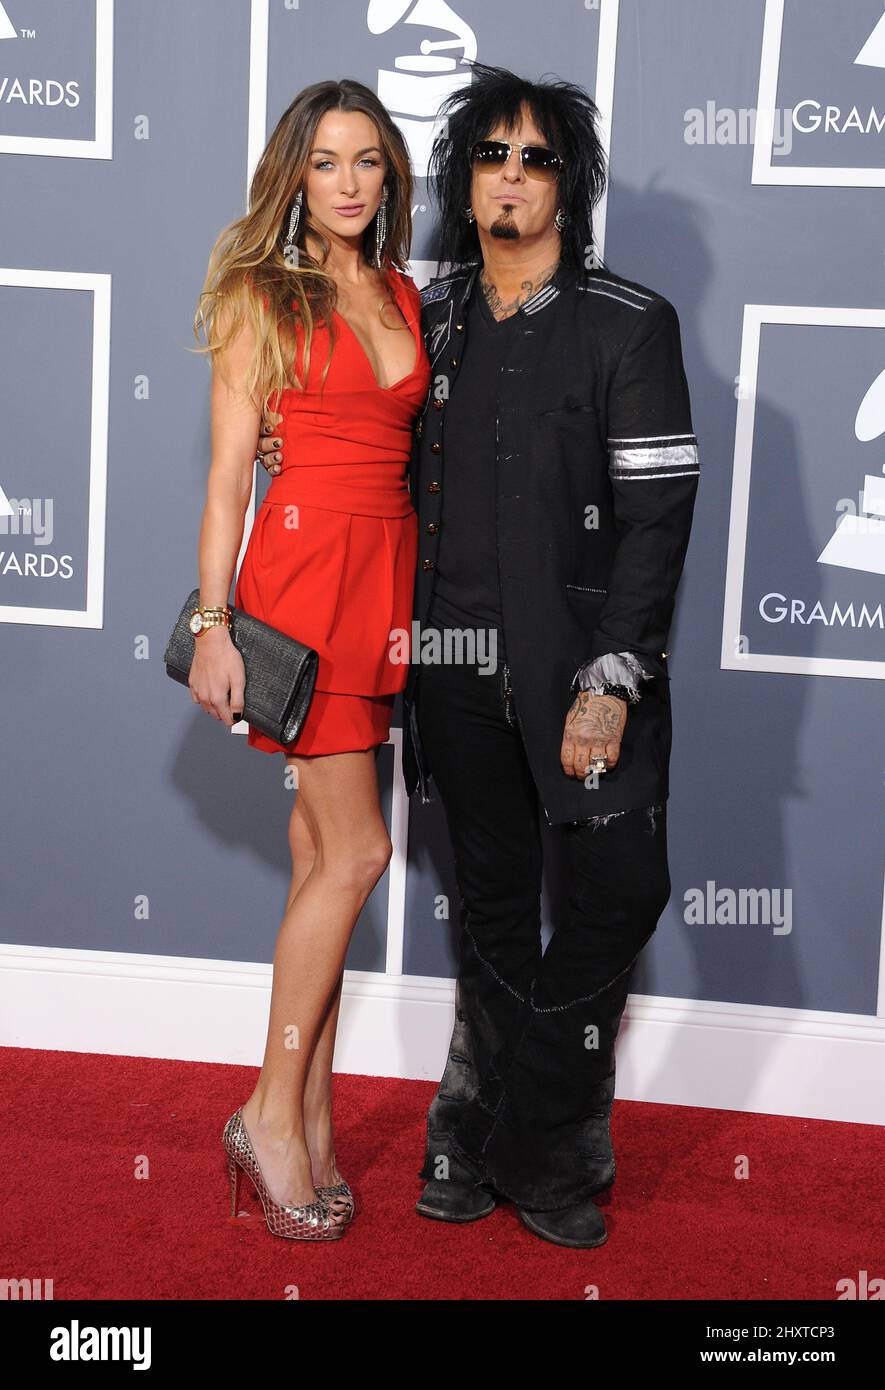 Nikki Sixx And Courtney Bingham Arriving At The 53rd Annual Grammy Awards Held At The Staples